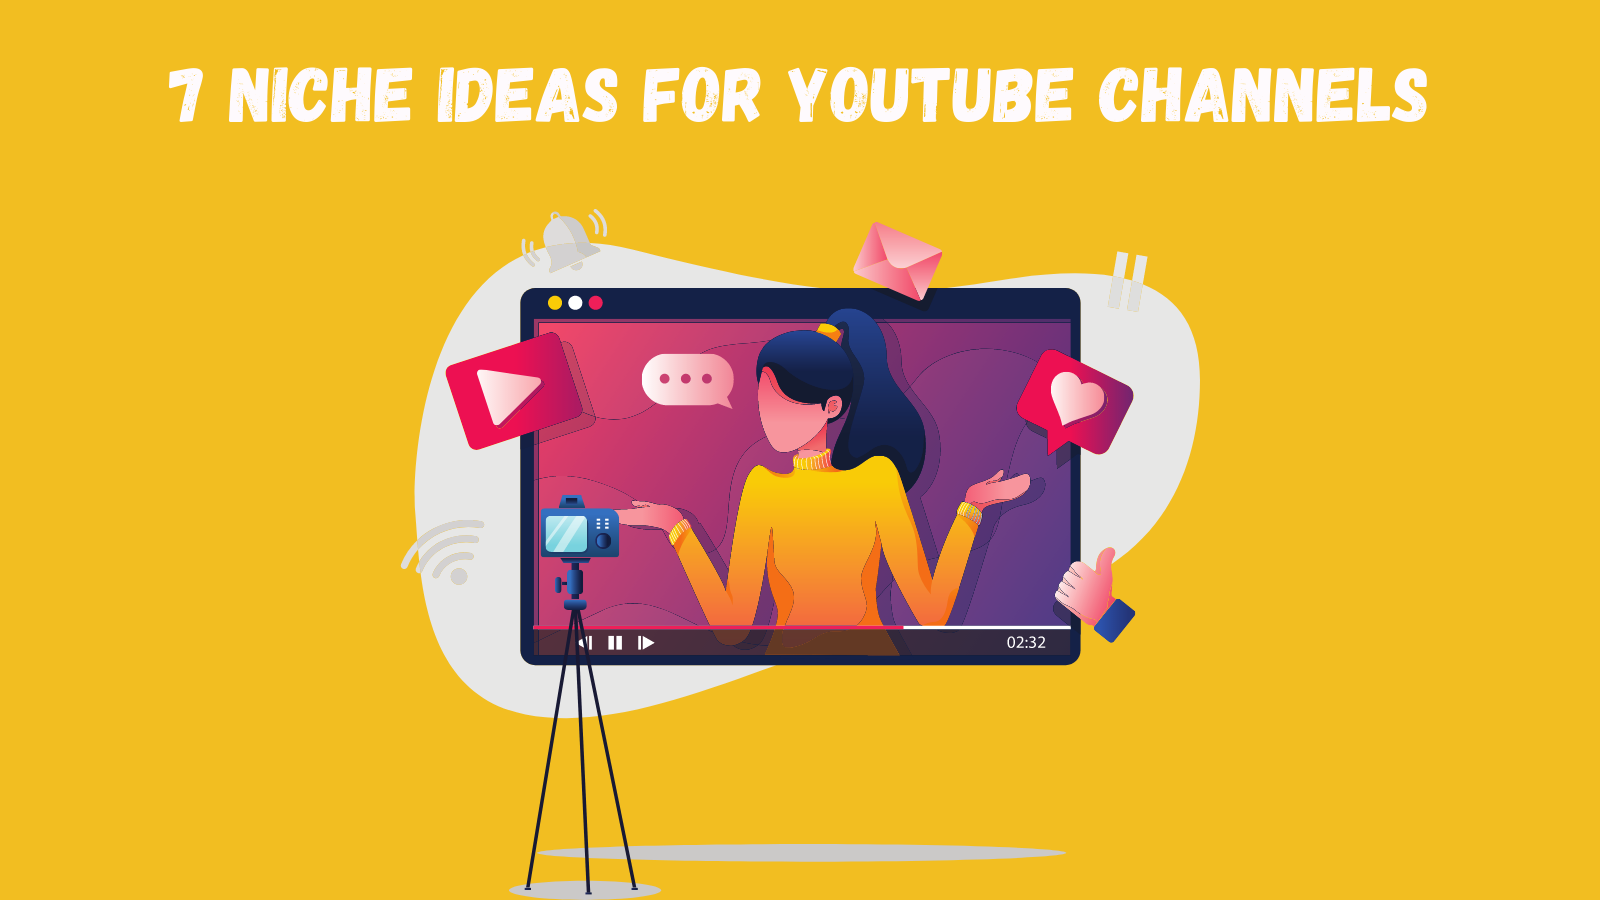 7 YouTube Niche Ideas to Boost Your Channel in 2022